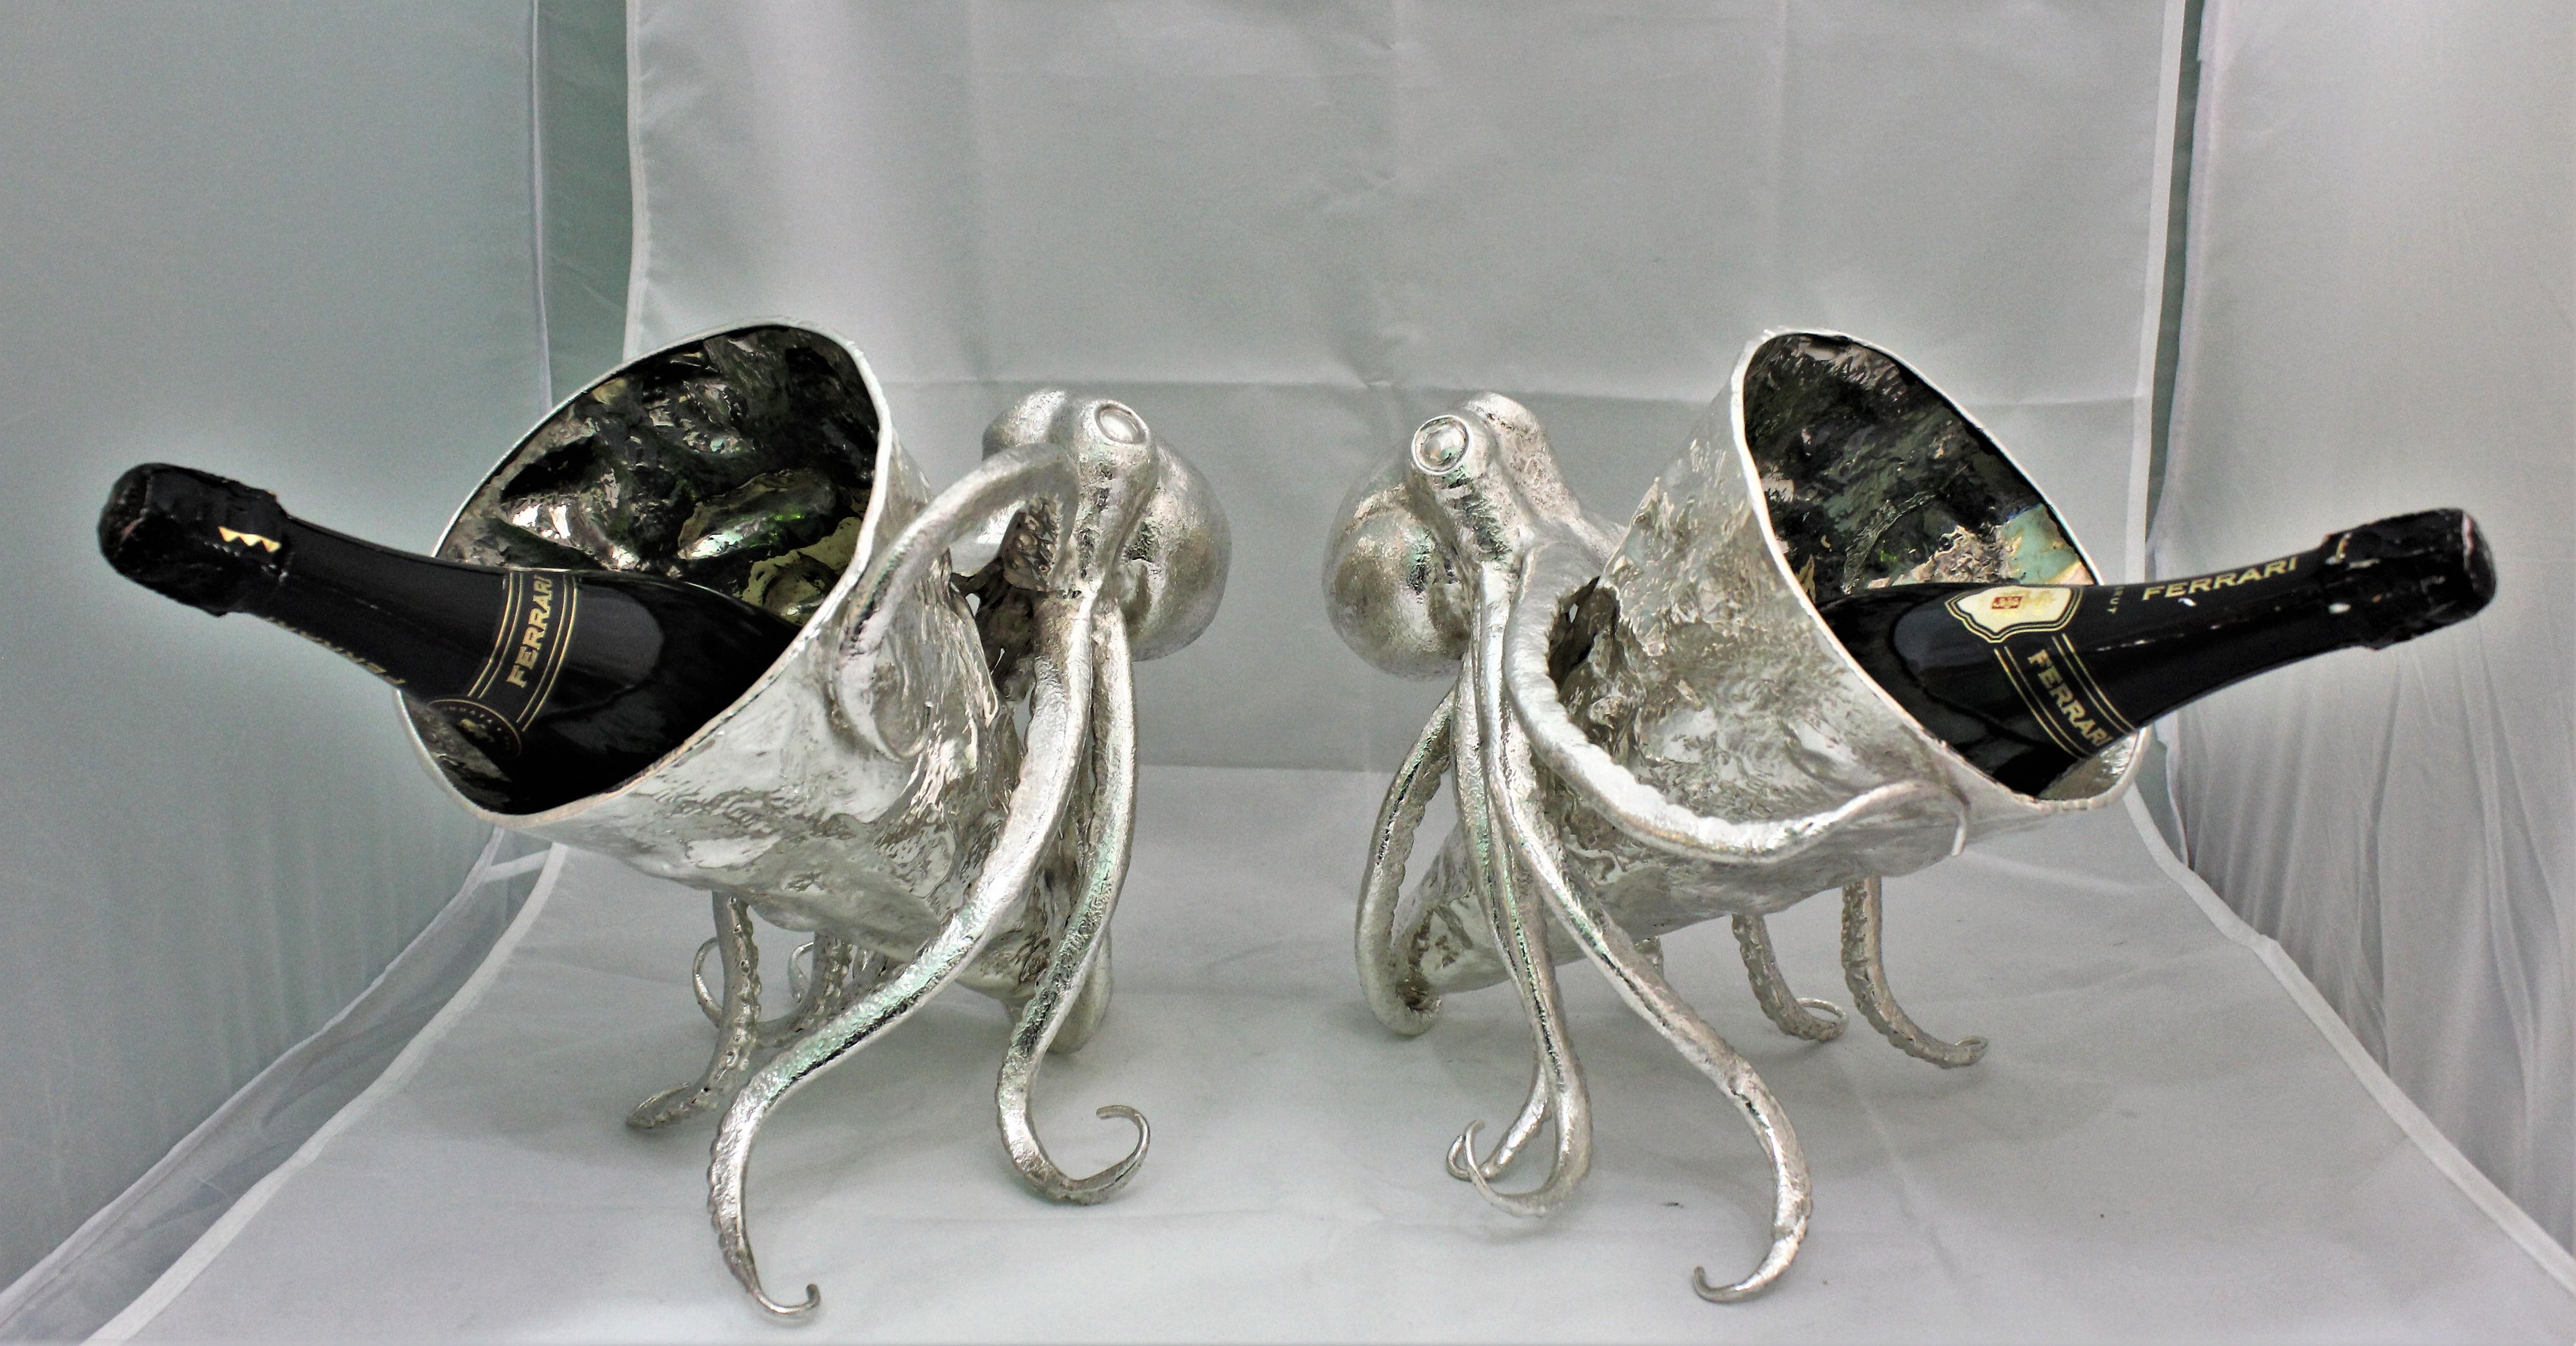 Wonderful pair of silver wine coolers realized around 1930s by a master silversmith from Palermo, Italy.

The wine cooler is cone shaped and hand embossed and hammered to look like sea rocks.

The cone is hold, or better embraced, by the 8